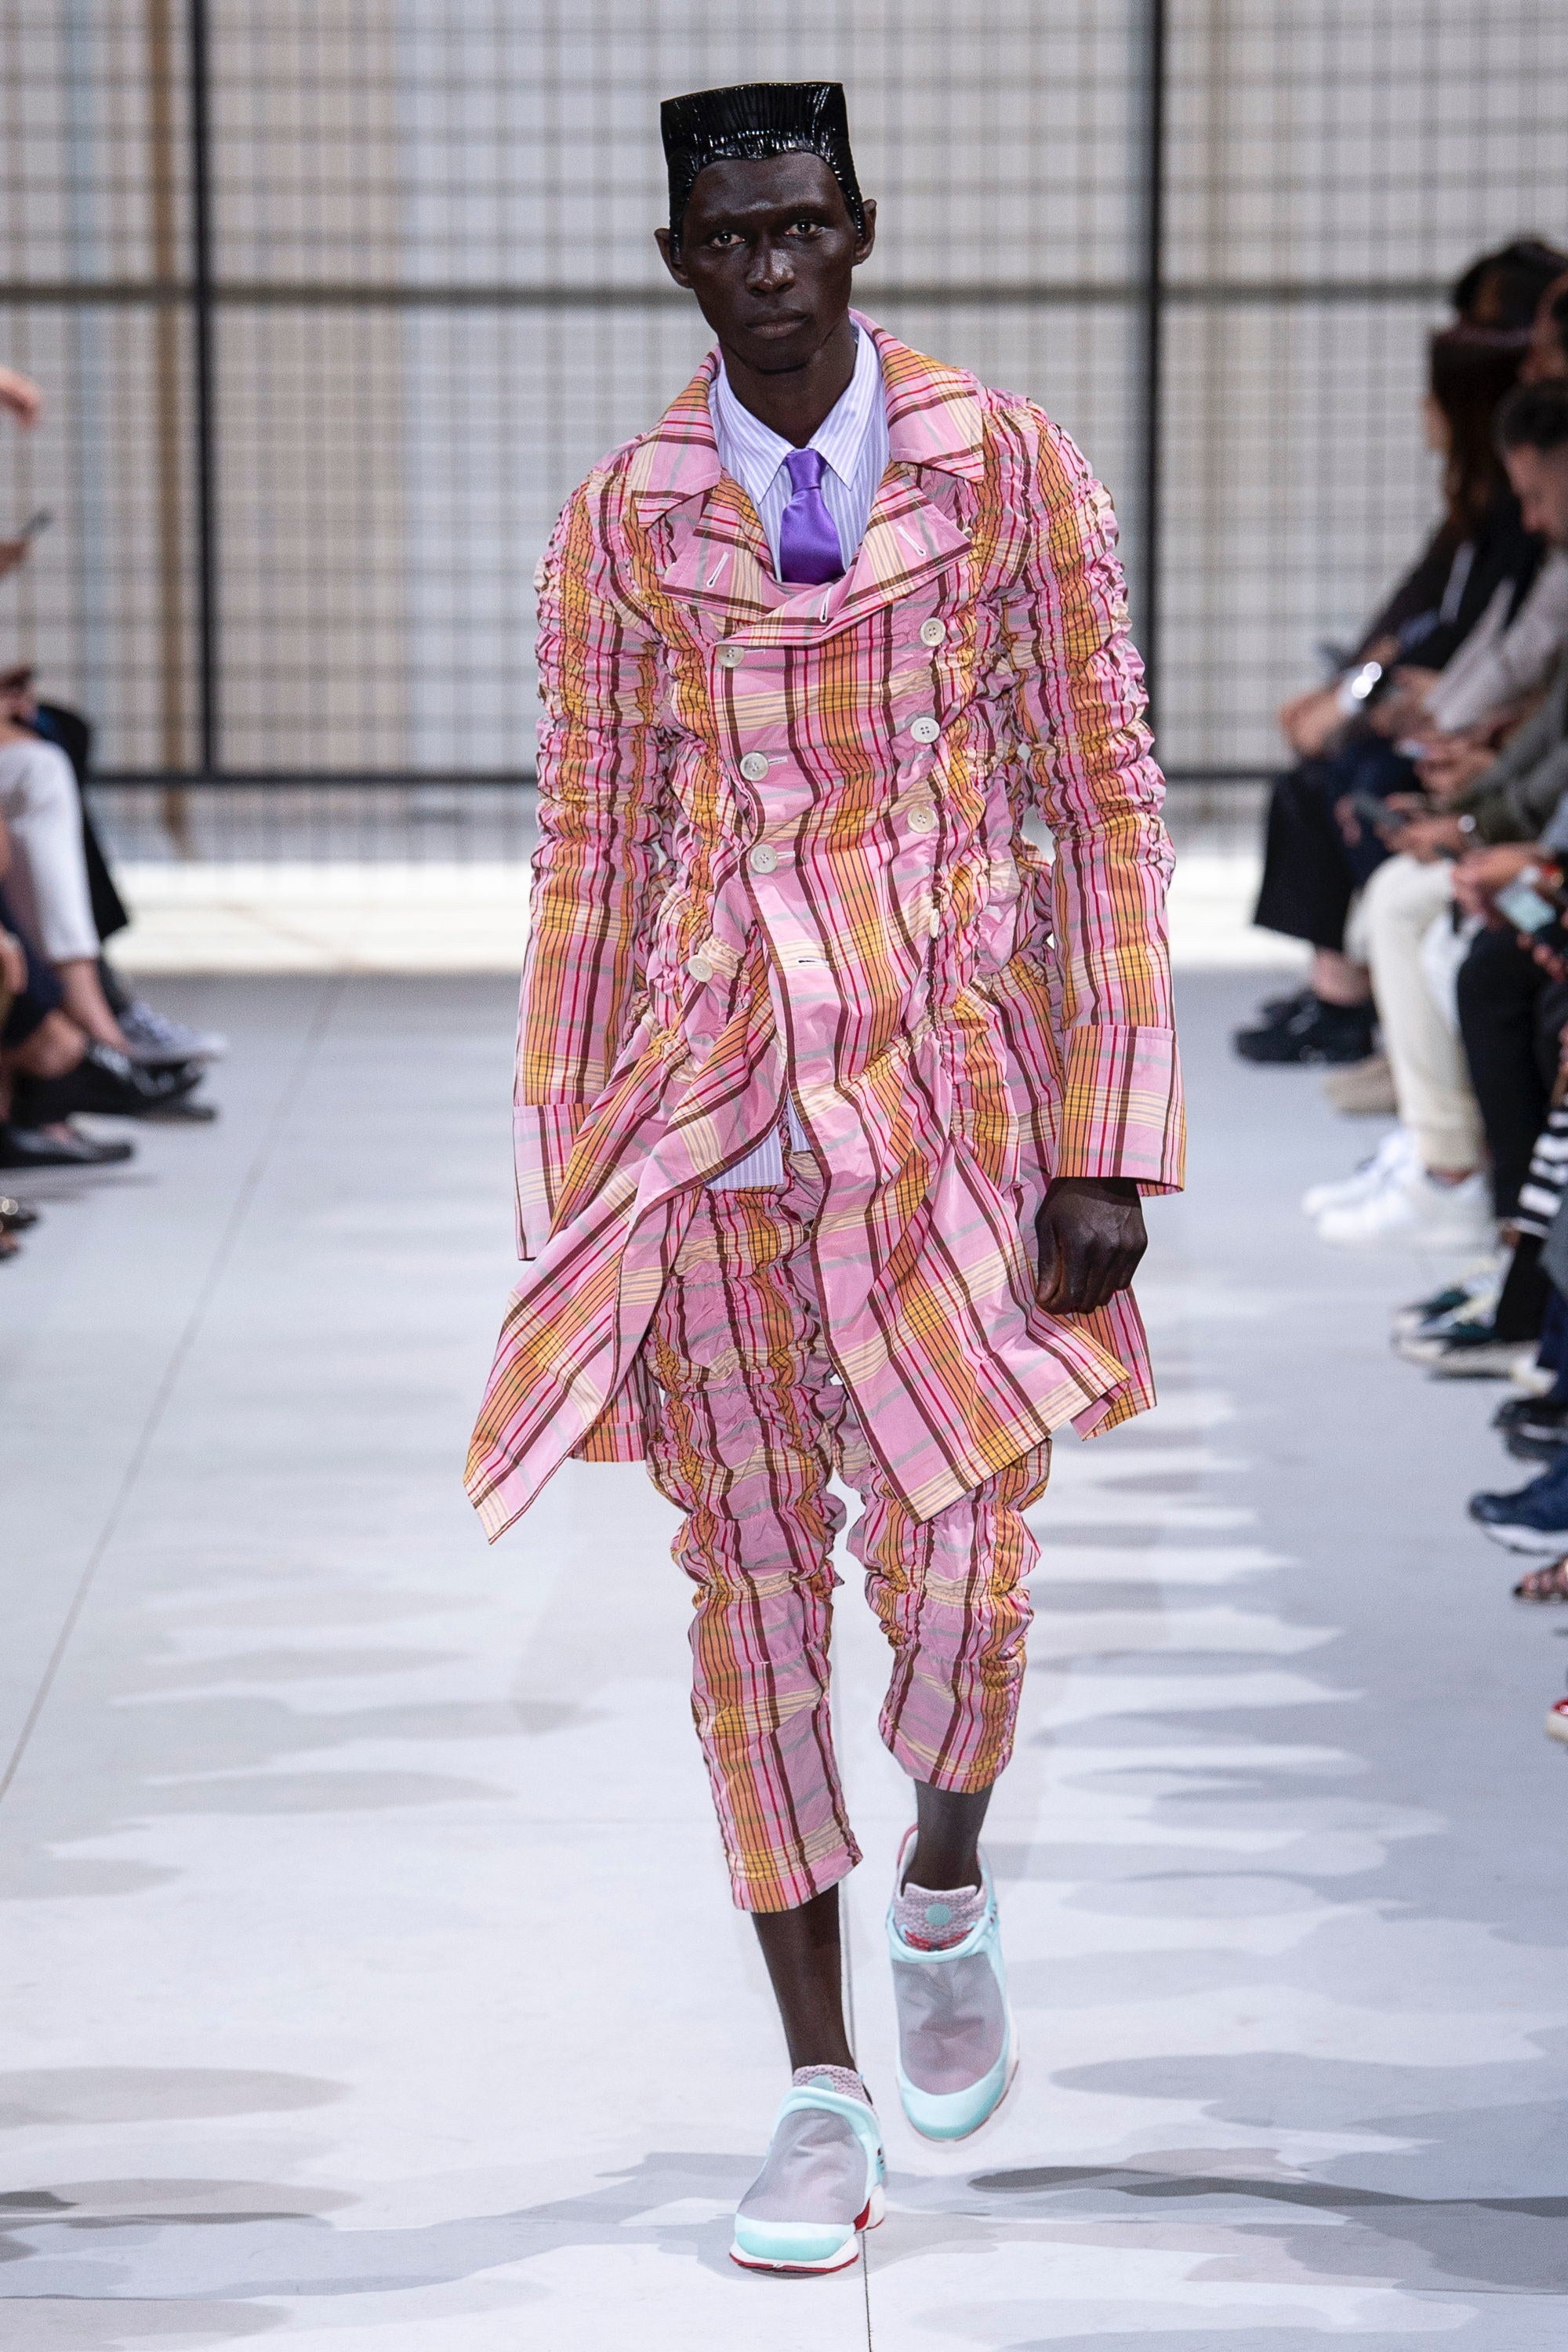 Men’s Fashion Report: Go Bold For Spring With Colorful Streetwear!